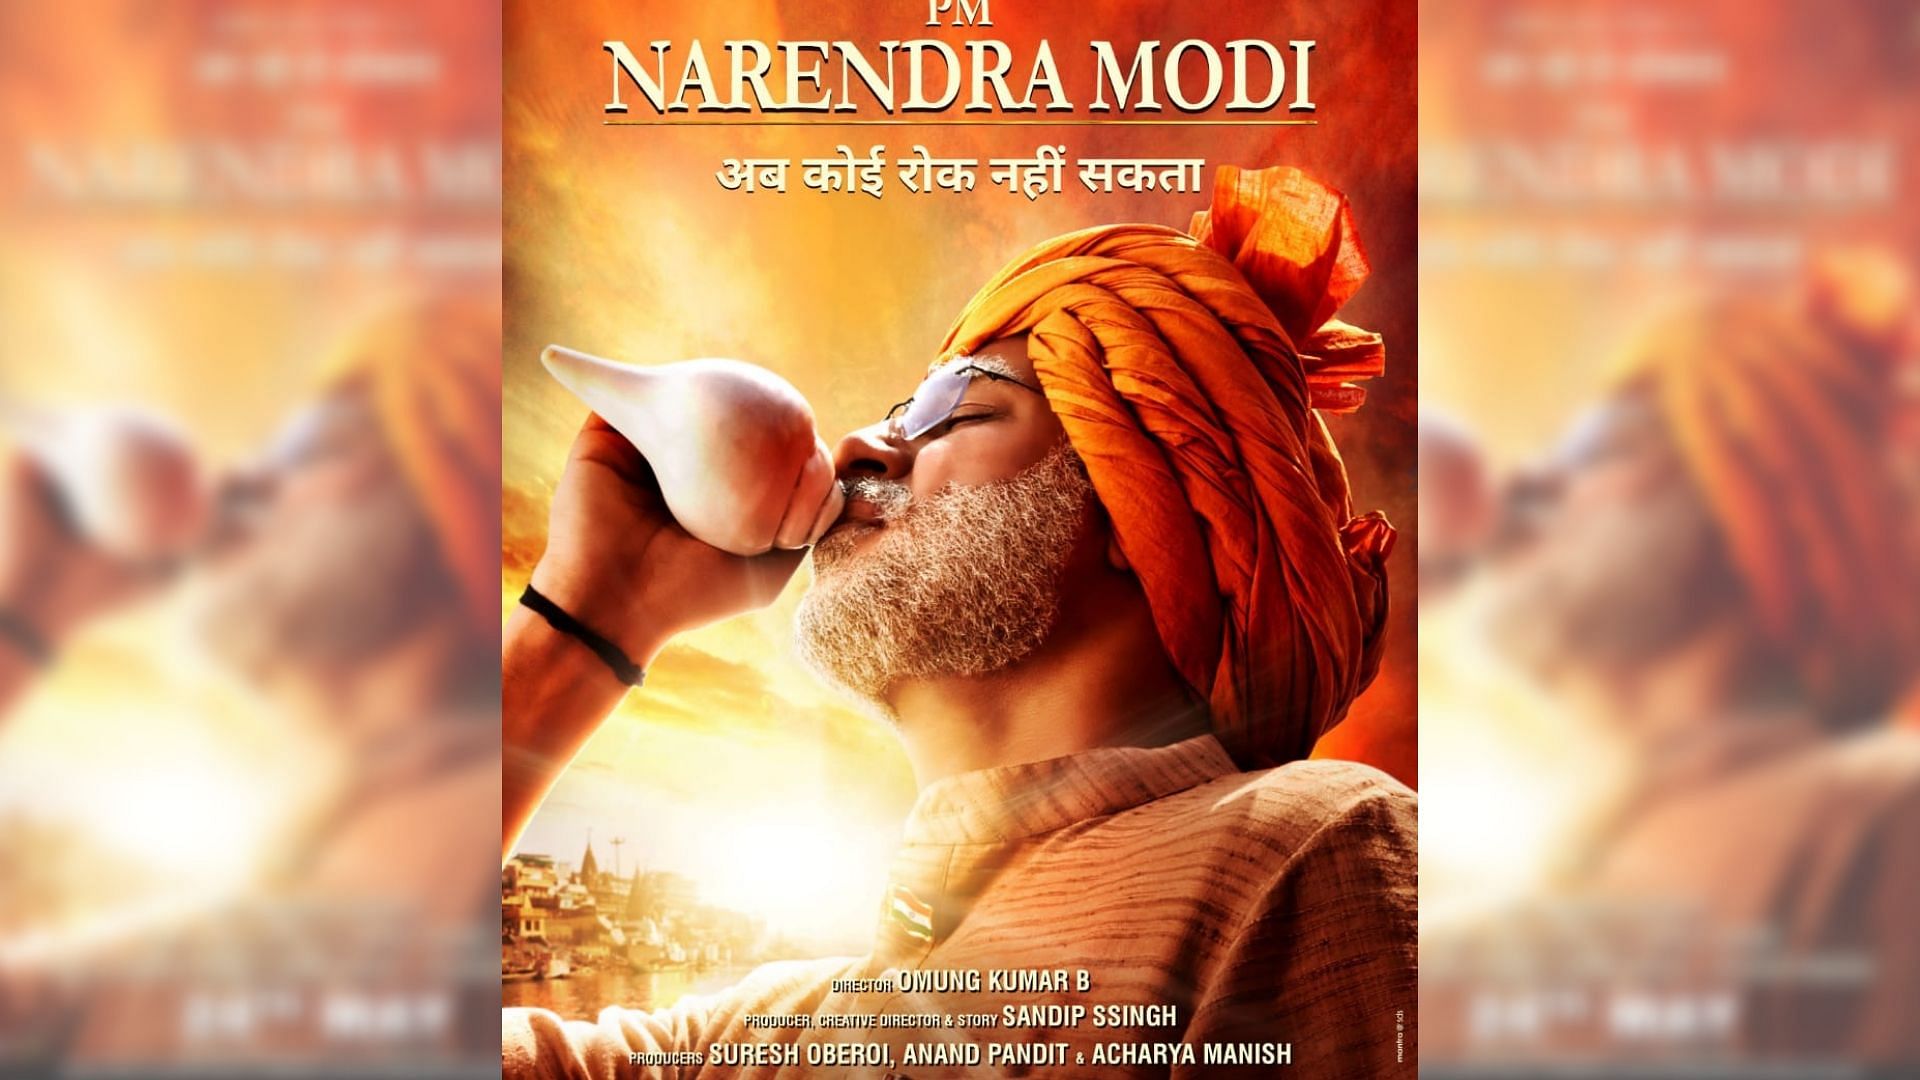 A new poster for <i>PM Narendra Modi</i>, the upcoming biopic on Modi was released following exit polls.